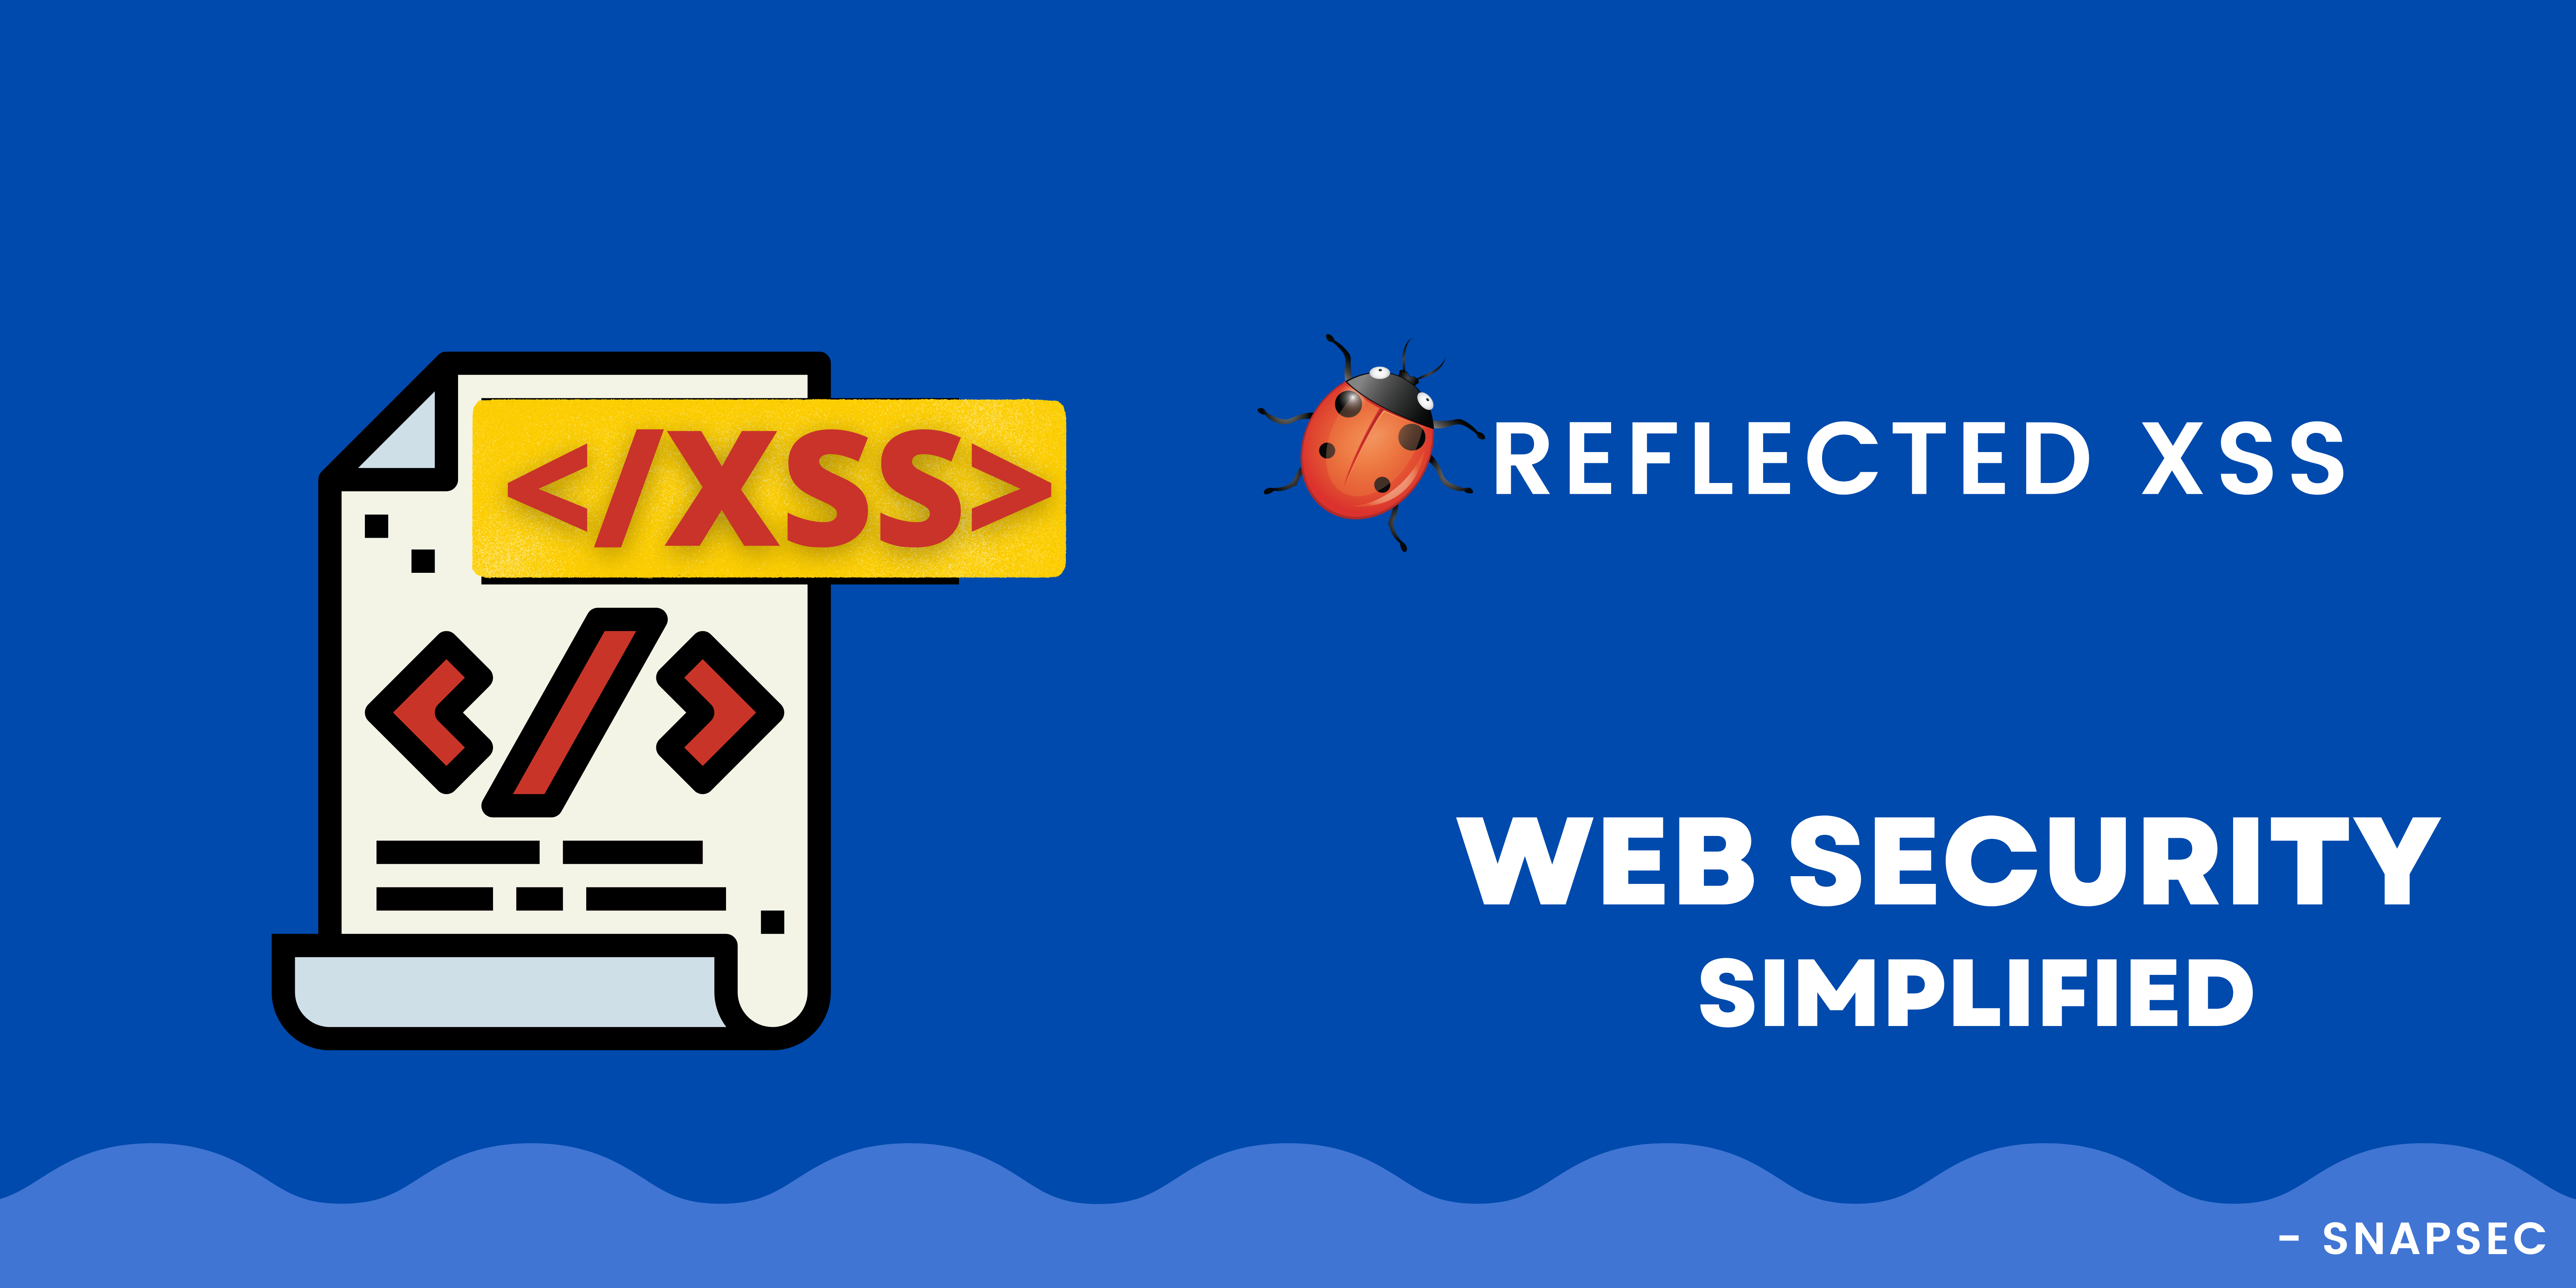 Security Simplified - Reflected XSS